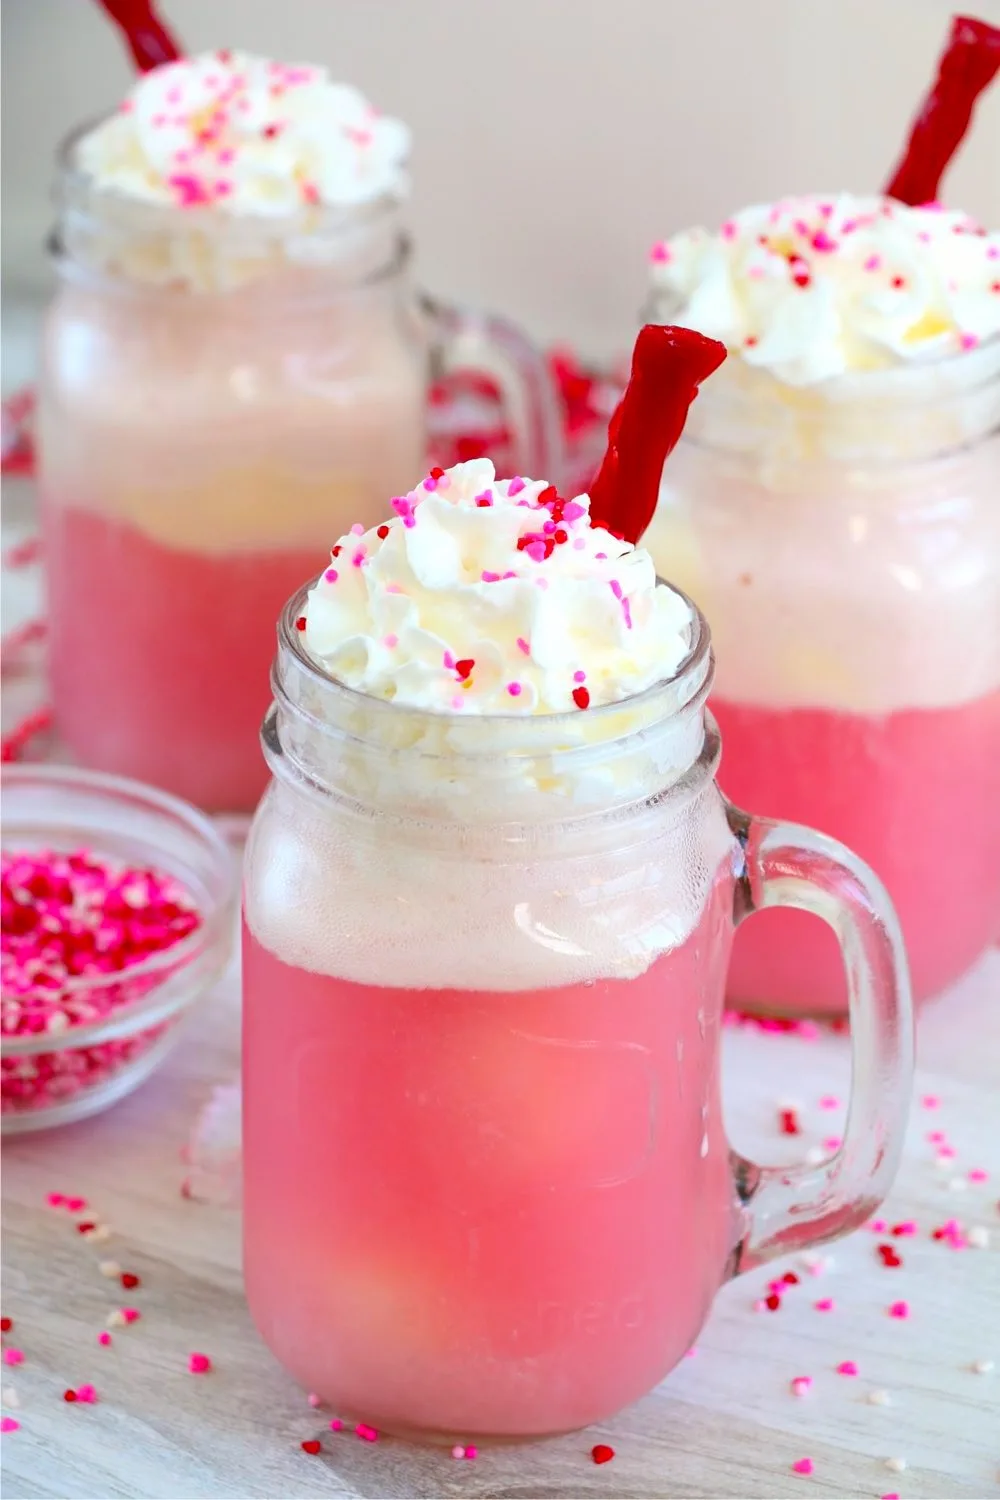 3 Cherry floats in mason jars with whipped cream and pink sprinkles.